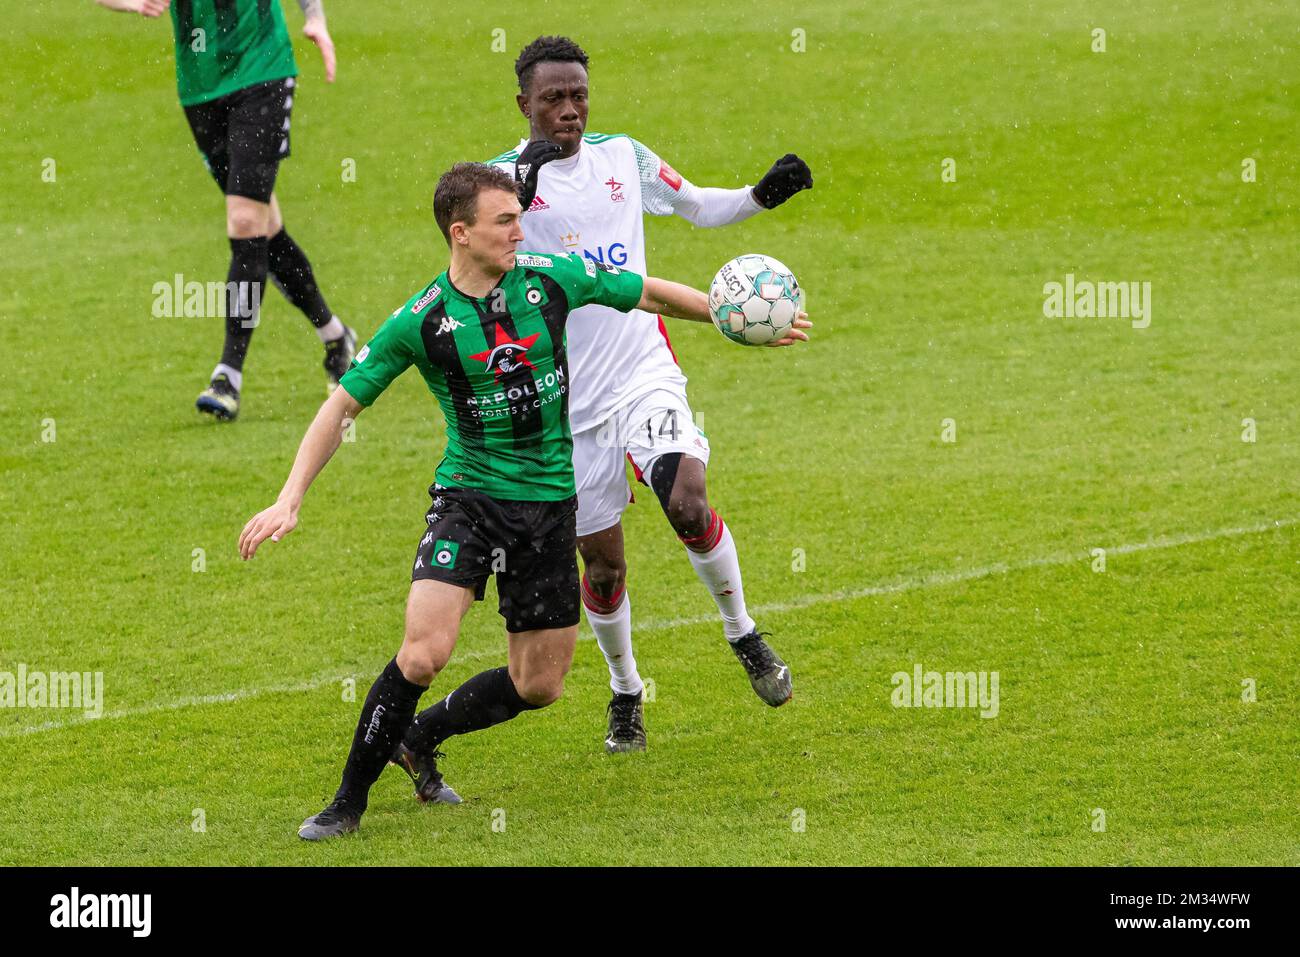 OHL's Kamal Sowah and Cercle's Robbe Decostere fight for the ball during a soccer match between Cercle Brugge and Oud-Heverlee Leuven, Saturday 10 April 2021 in Brugge, on day 33 of the 'Jupiler Pro League' first division of the Belgian championship. BELGA PHOTO KURT DESPLENTER Stock Photo